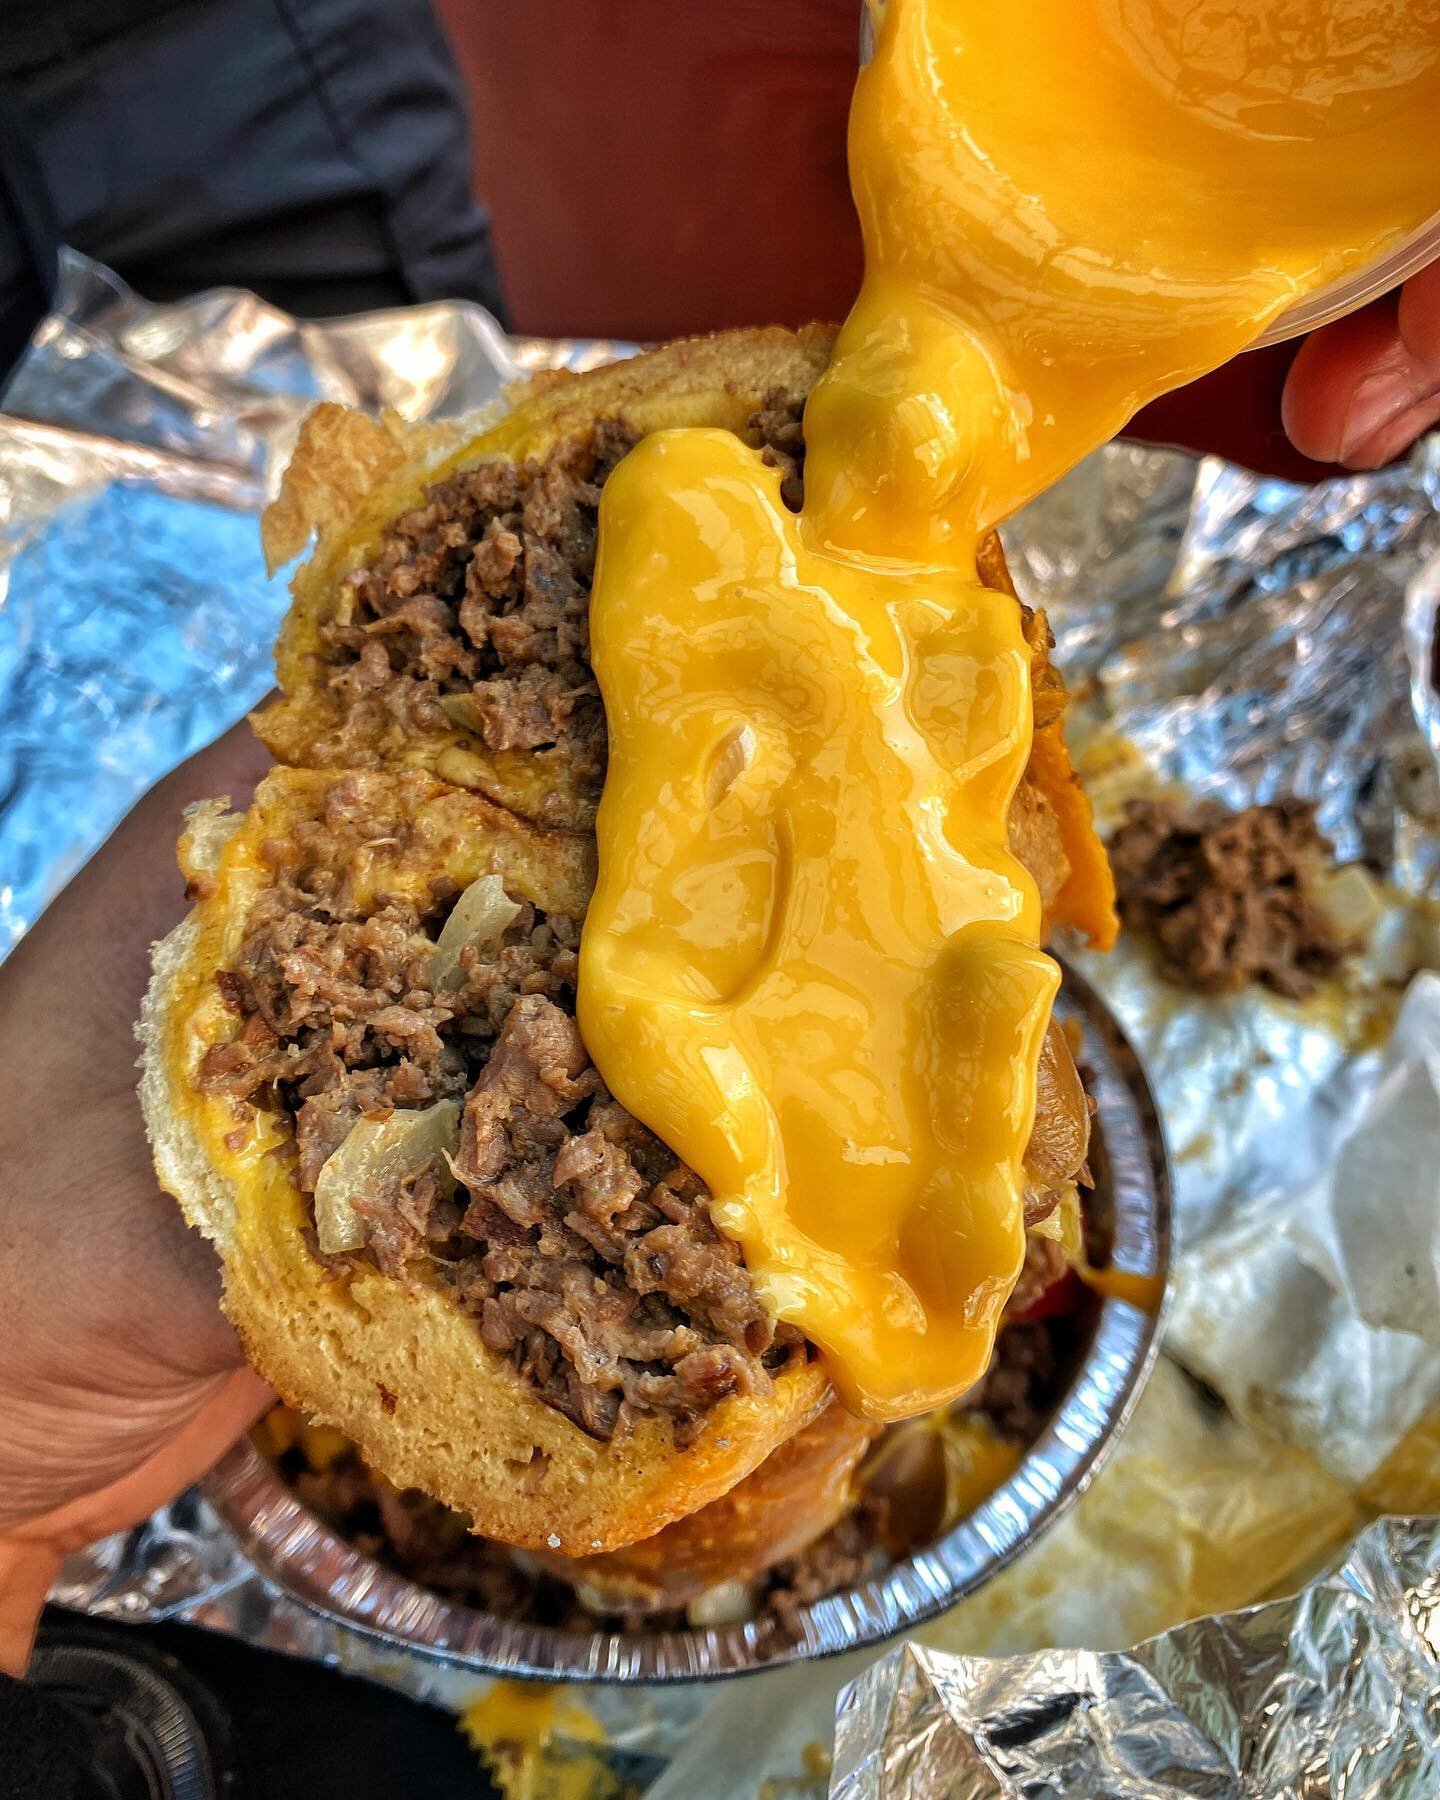 ALL that CHEESE! 🧀 Pick up a delicious CHEESESTEAK! 🥩
🔥 On TUESDAY, get a medium CHEESESTEAK for only $6.95!
‼️ WILLIAMSBURG LOCATION, UNTIL SOLD OUT‼️
#FEDOROFFS
_________________
📦 NATIONWIDE SHIPPING available via @GOLDBELLY‼️
🔗 Order ONLINE 